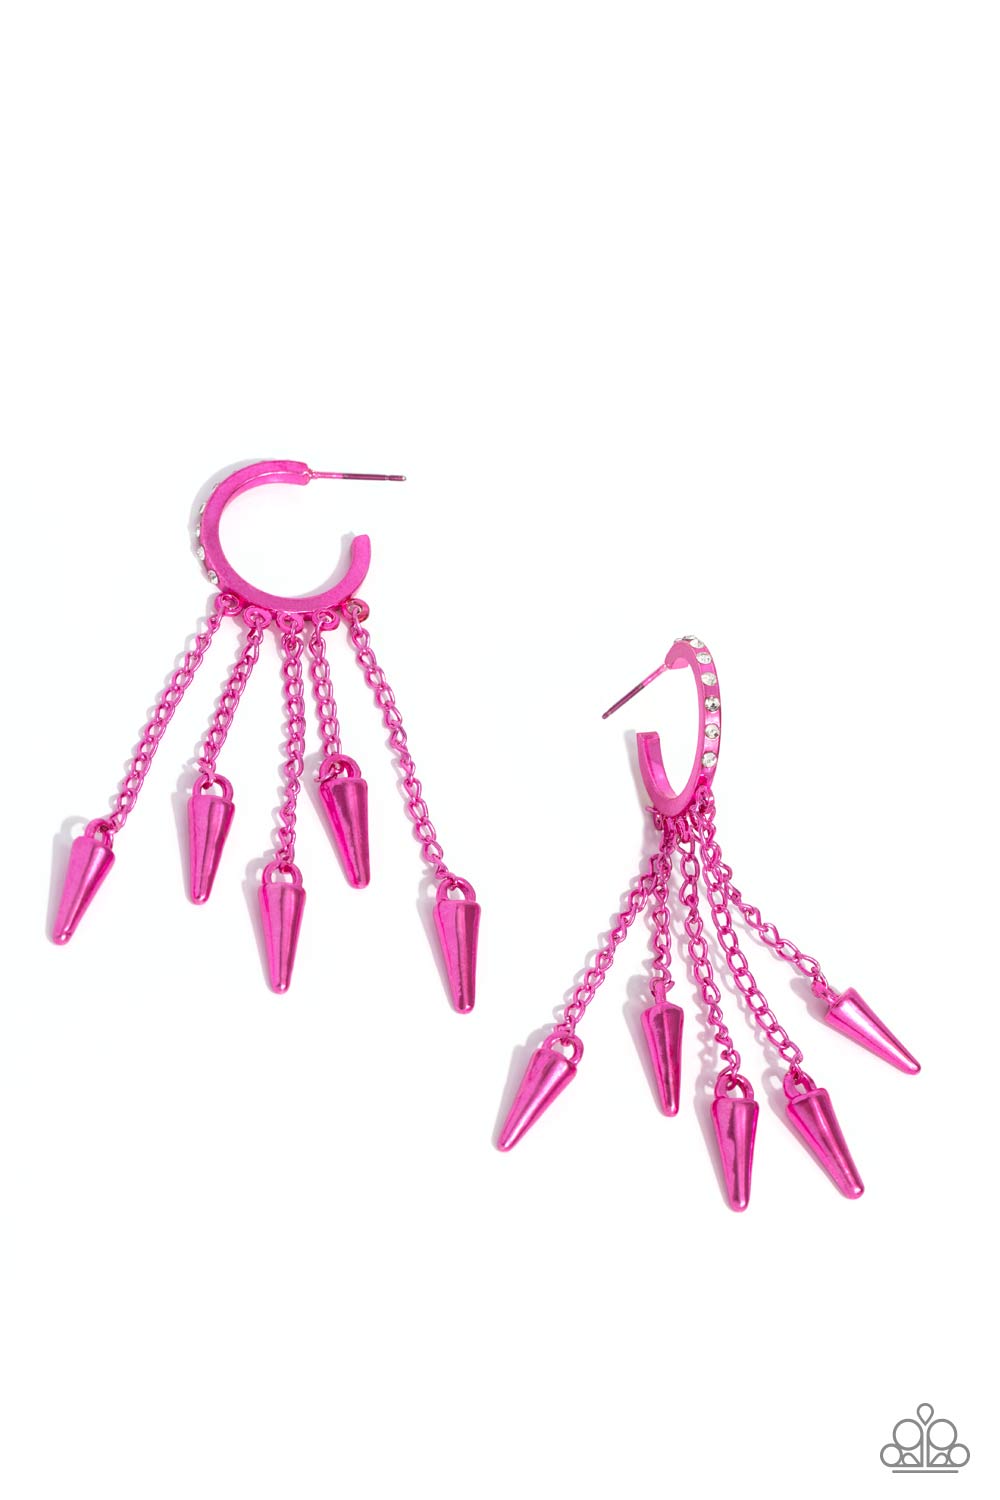 Piquant Punk - Pink Earrings